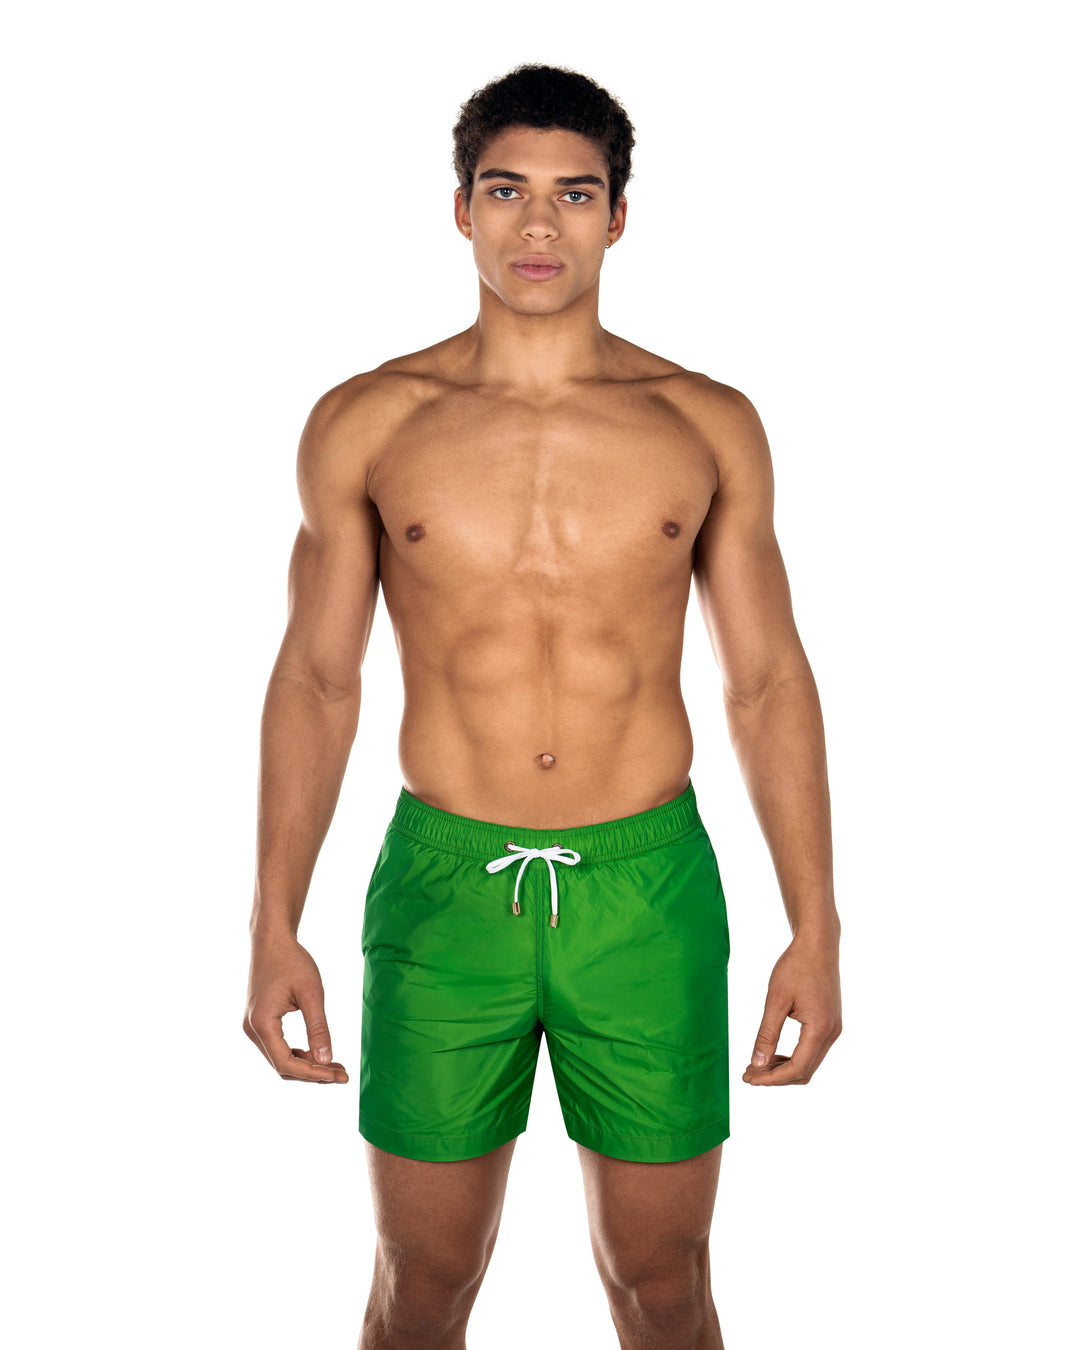 Easton Green Mens Swim ShortCut in a tailored silhouette and designed with an elasticated waistband, our mid-length Easton swim short  is our refined take on the classic swim shorts.
 Featuring